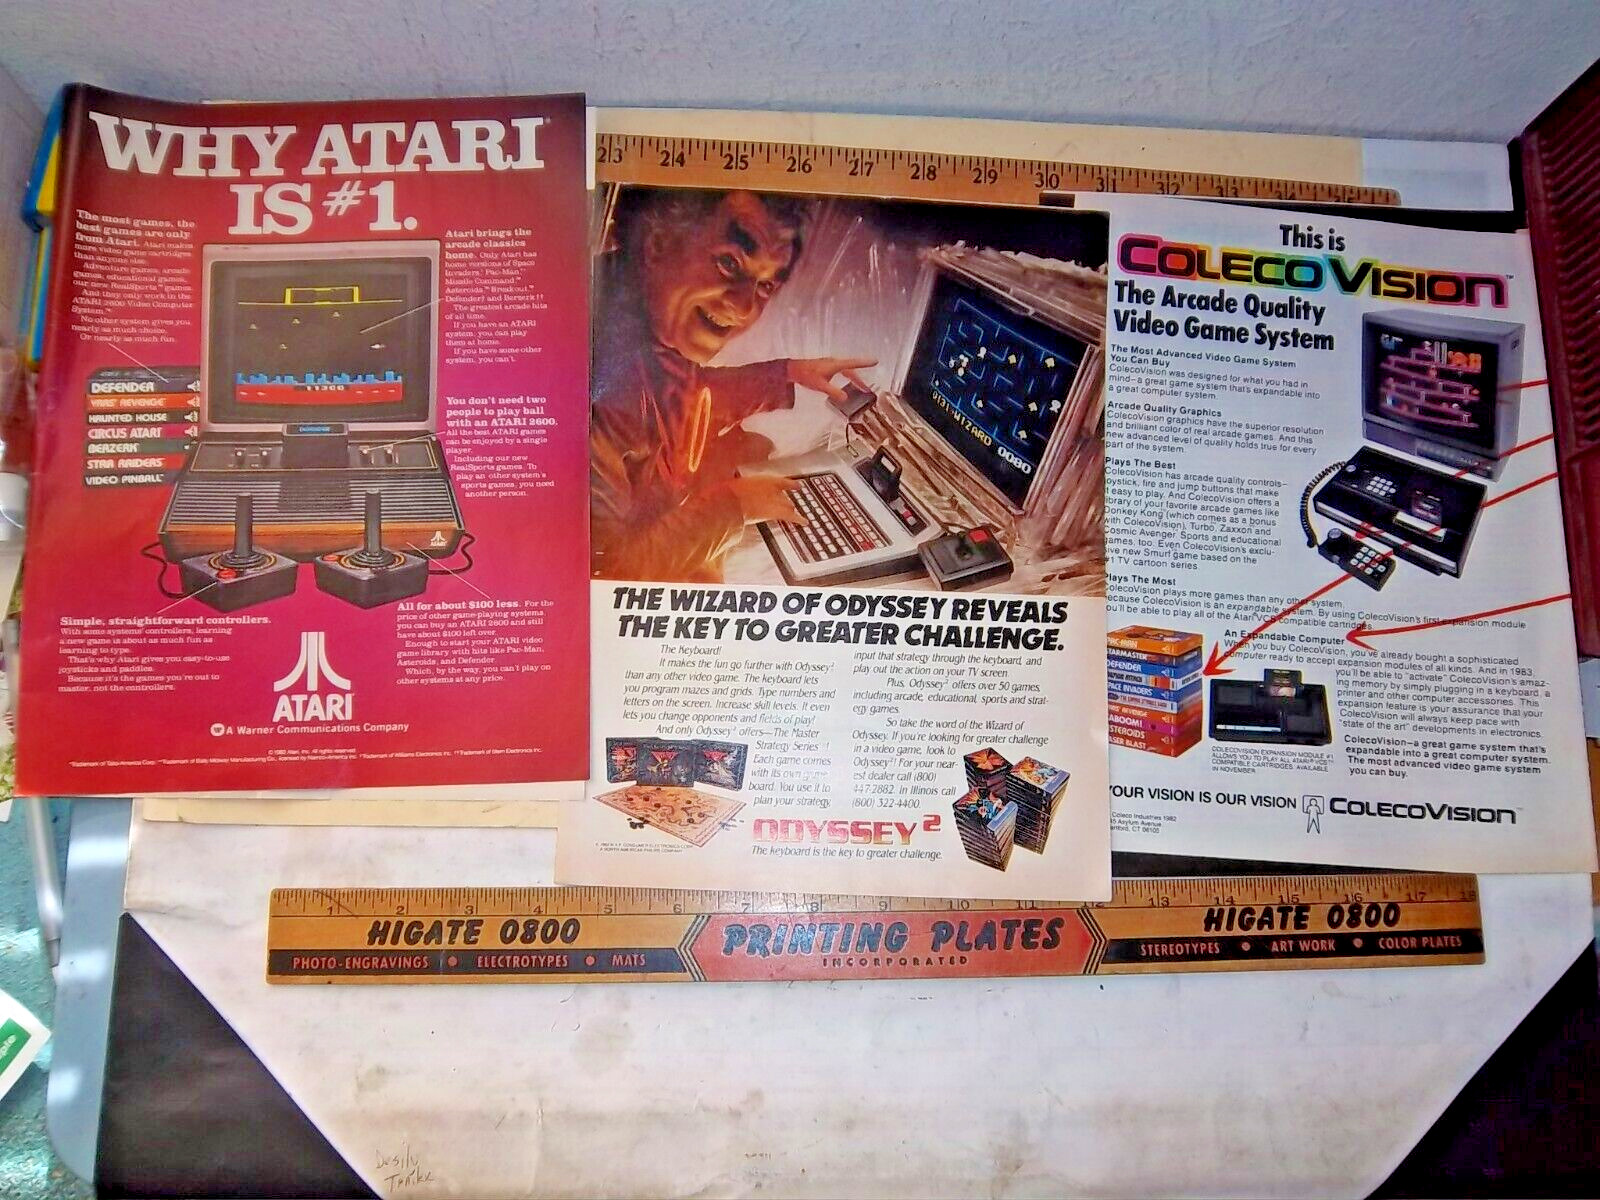 ATARI Coleco Vision Odyssey VIDEO  GAME COMPUTER SYSTEM VINTAGE PRINT ADS 8.5x11